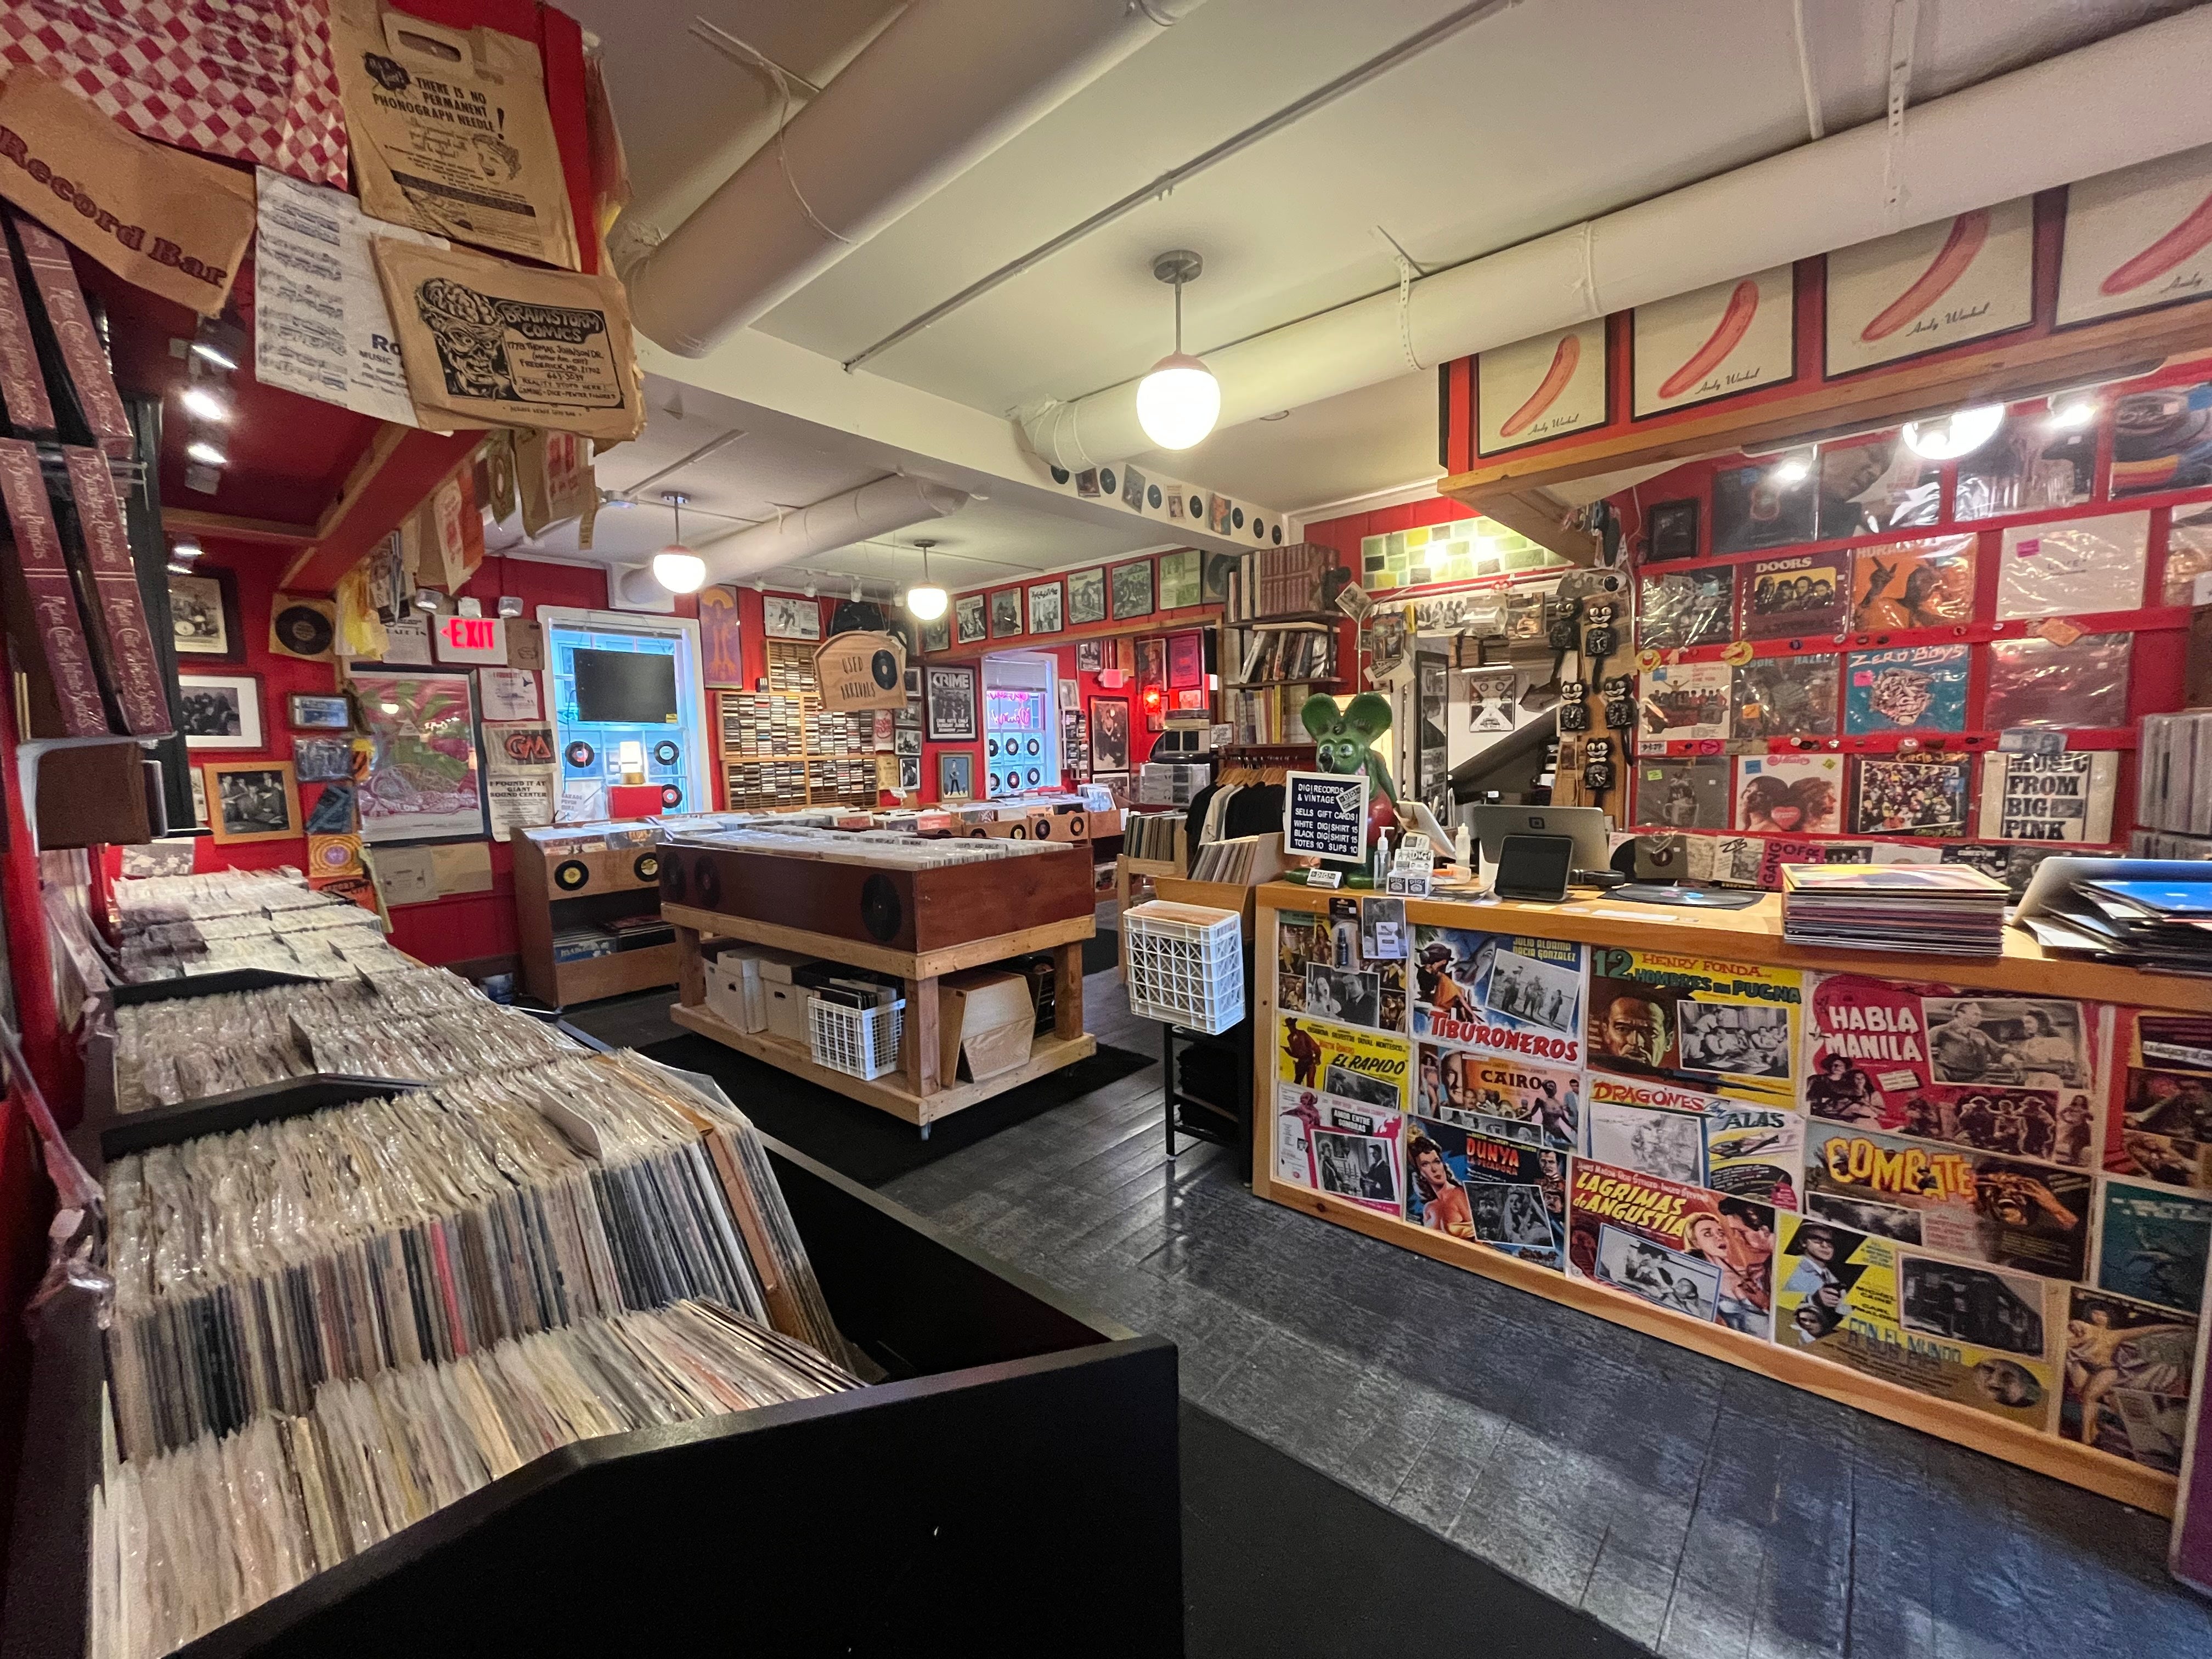 Hours can be lost browsing inside Leesburg’s incredible DIG Records & Vintage